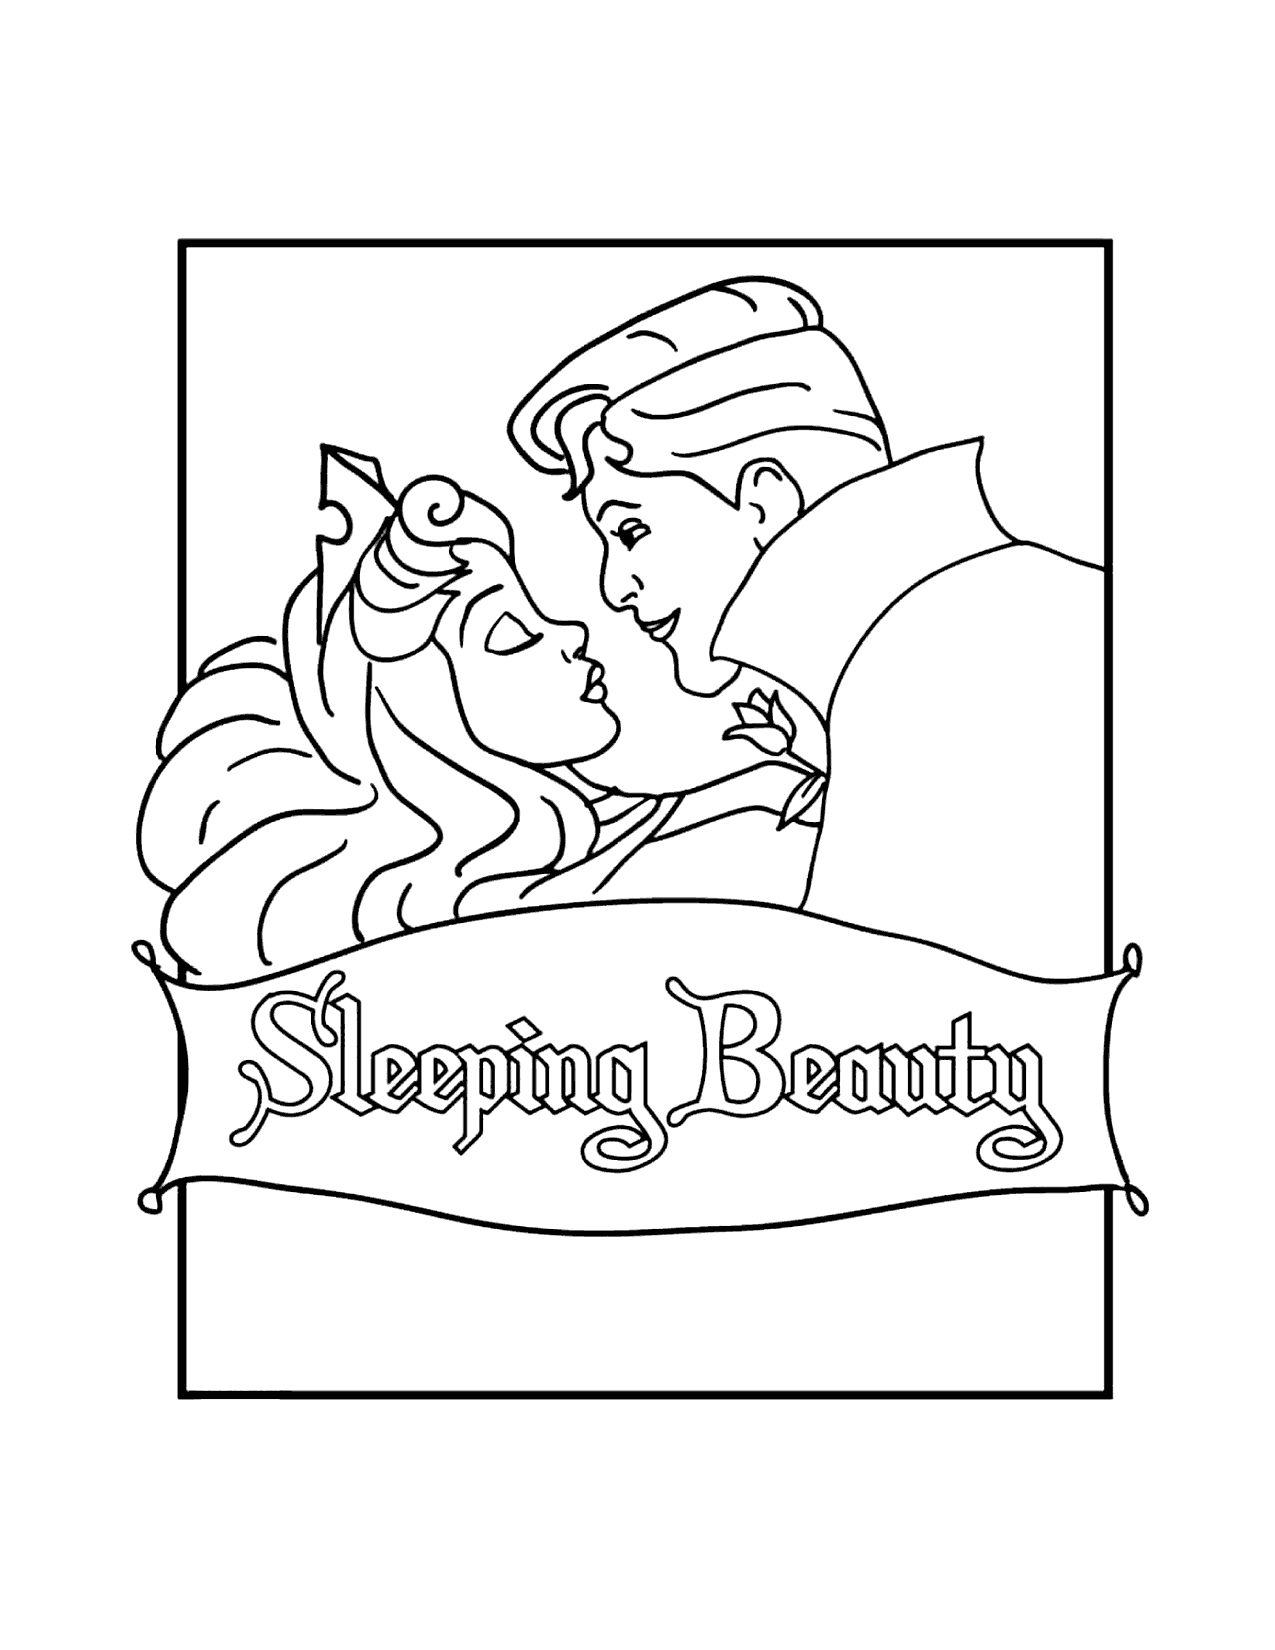 Sleeping Beauty Story Coloring Page